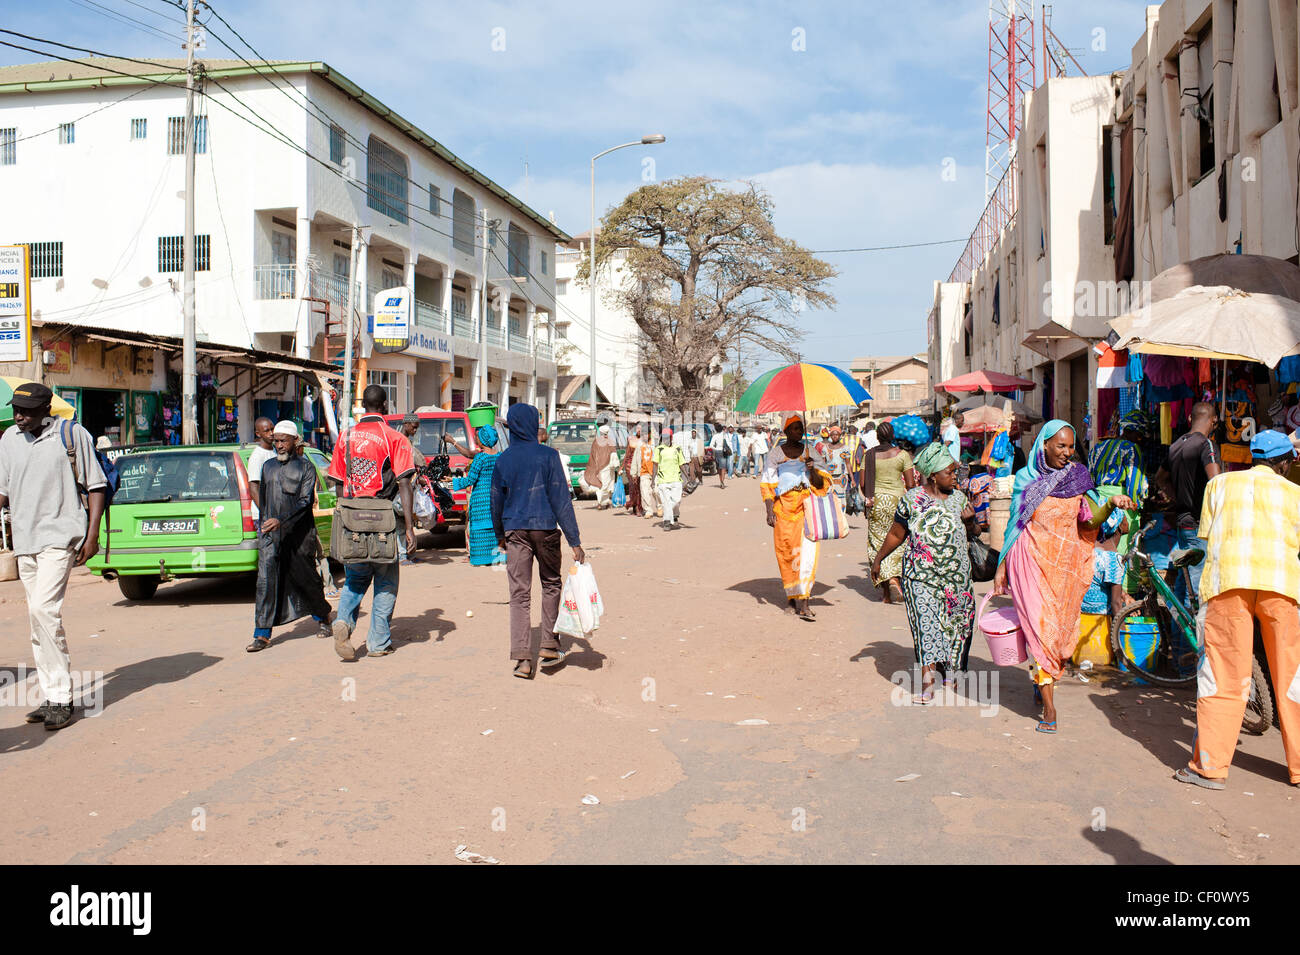 Busy scene at Serrekunda Market place in the Gambia, West Africa Stock Photo